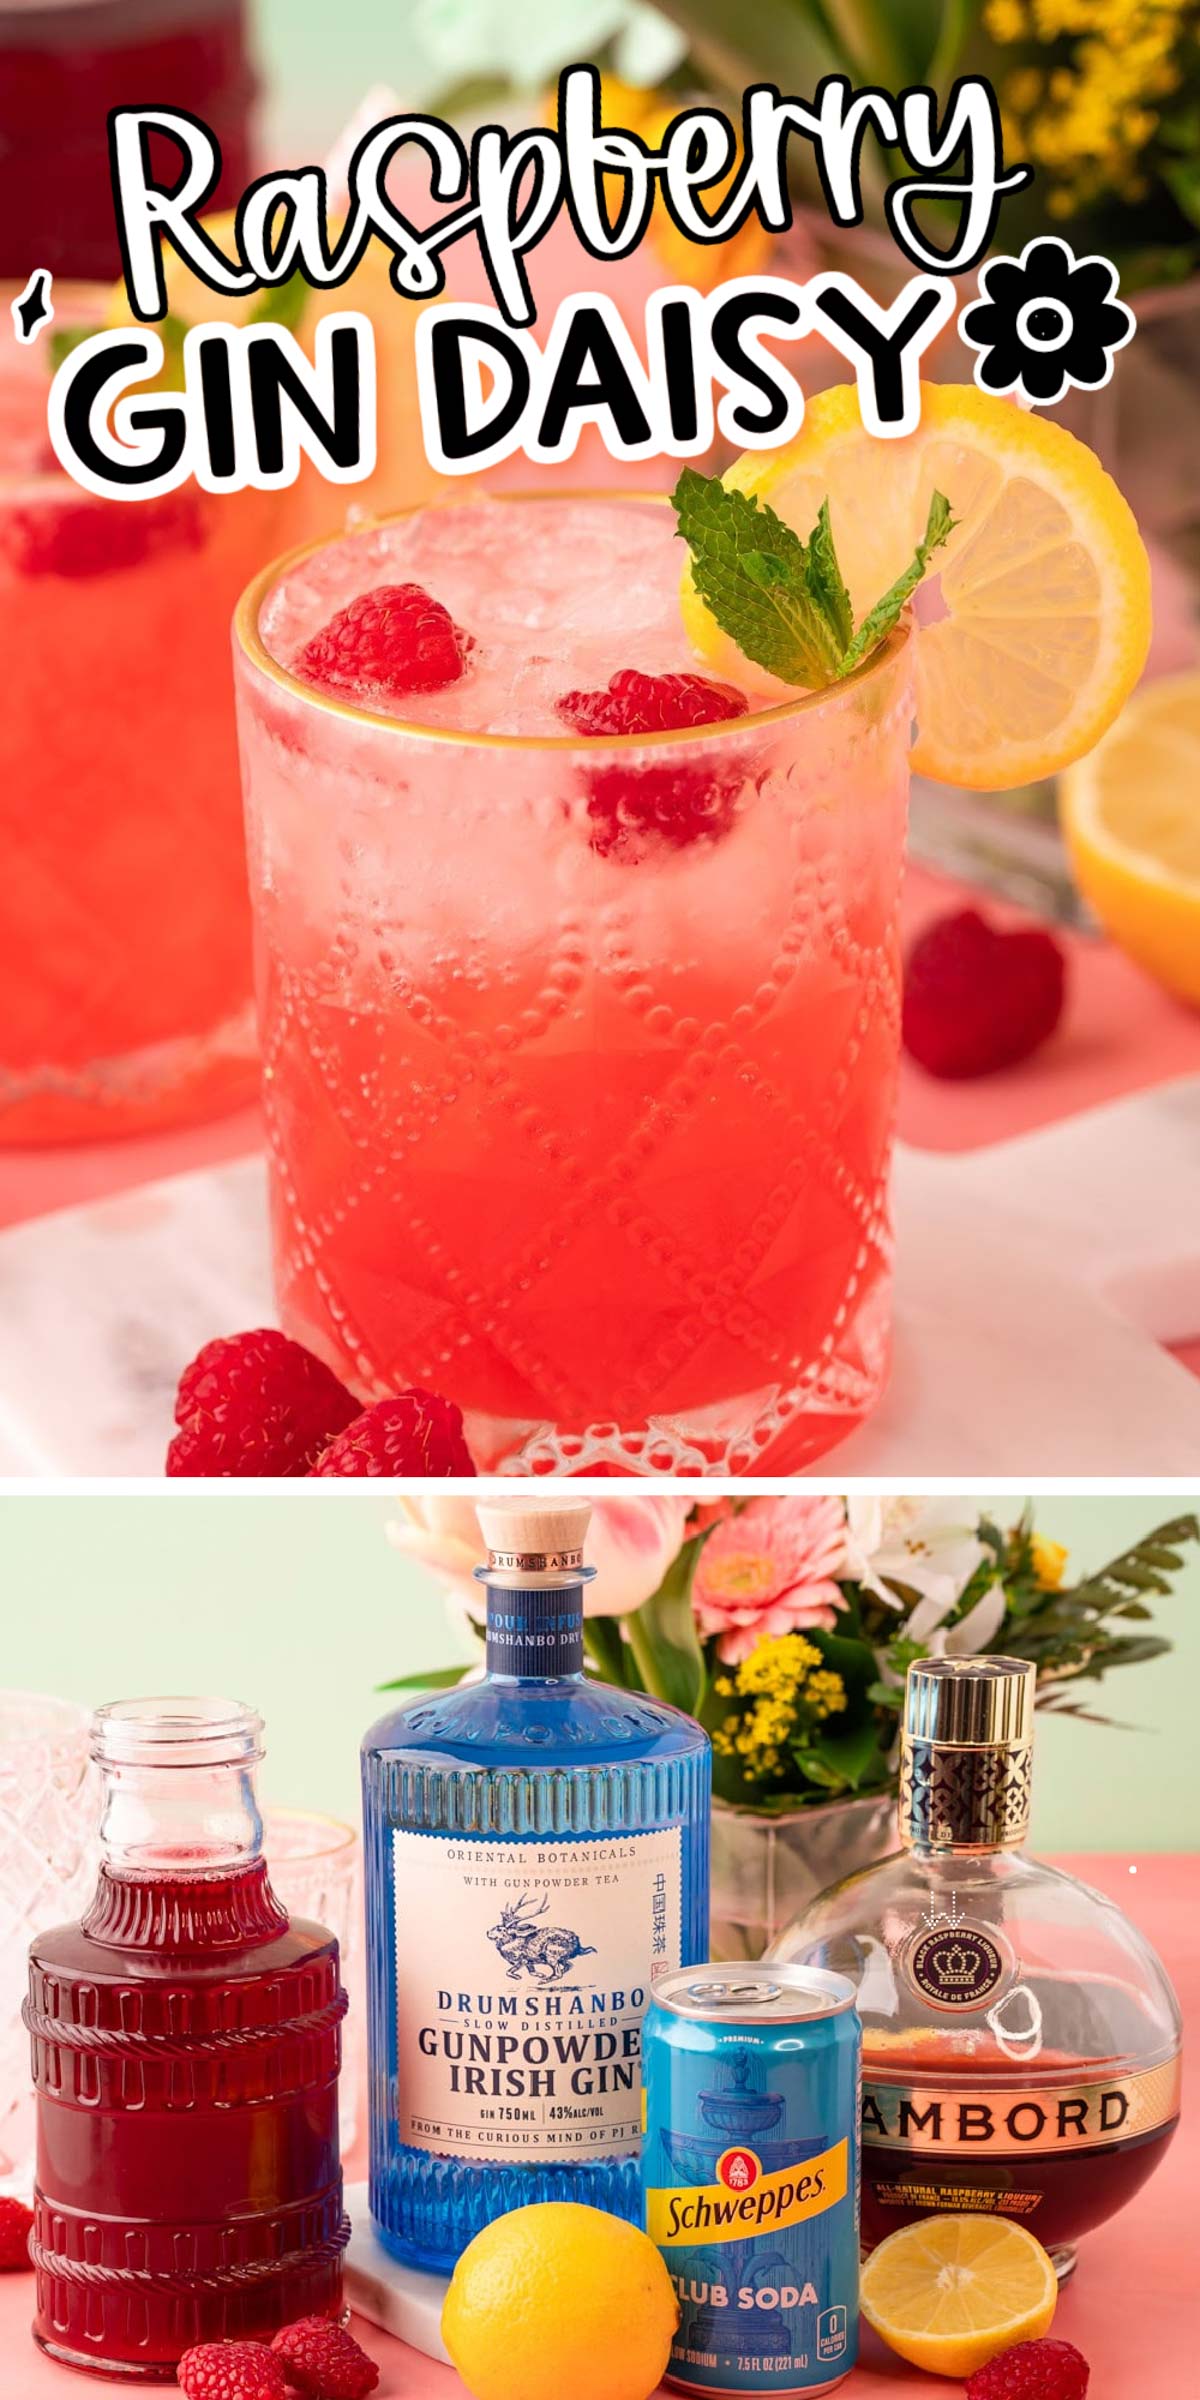 This Raspberry Gin Daisy is made with raspberry simple syrup, fresh lemon juice, gin, and Chambord that's topped off with club soda! The perfect chilled cocktail to sip on! via @sugarandsoulco